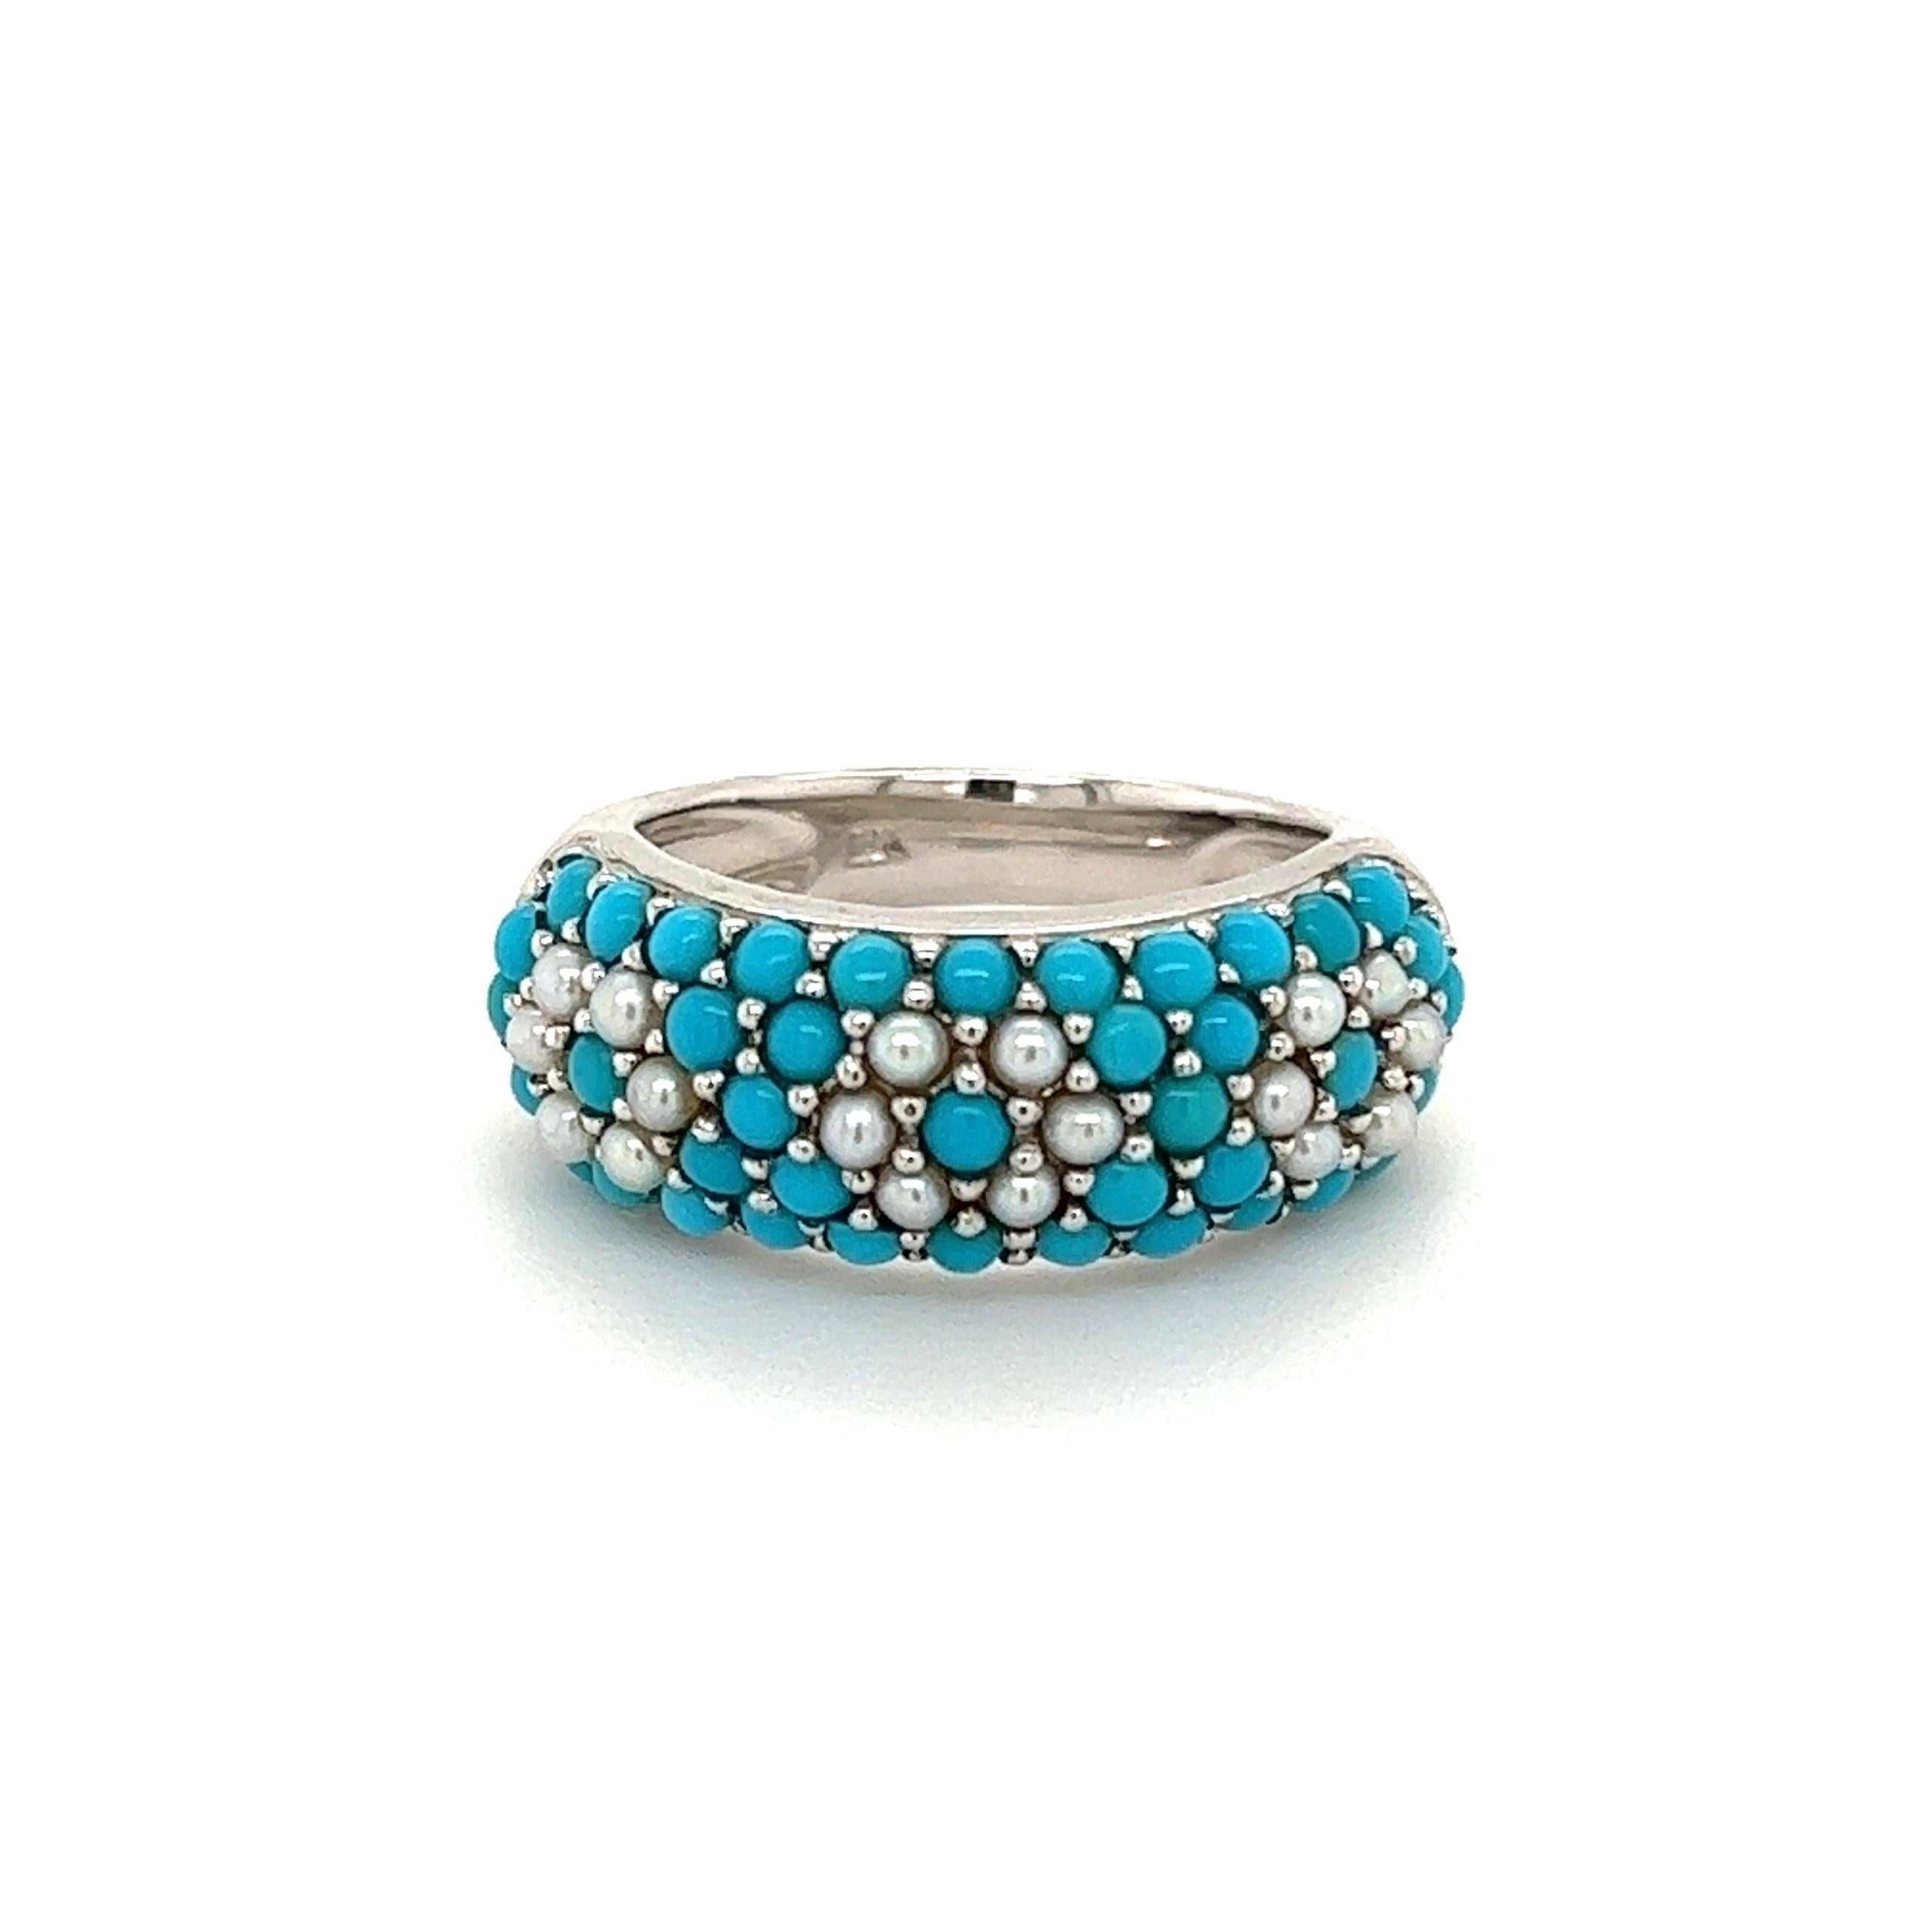 Turquoise and Pearl Gold Band Ring Estate Fine Jewelry In Excellent Condition For Sale In Montreal, QC